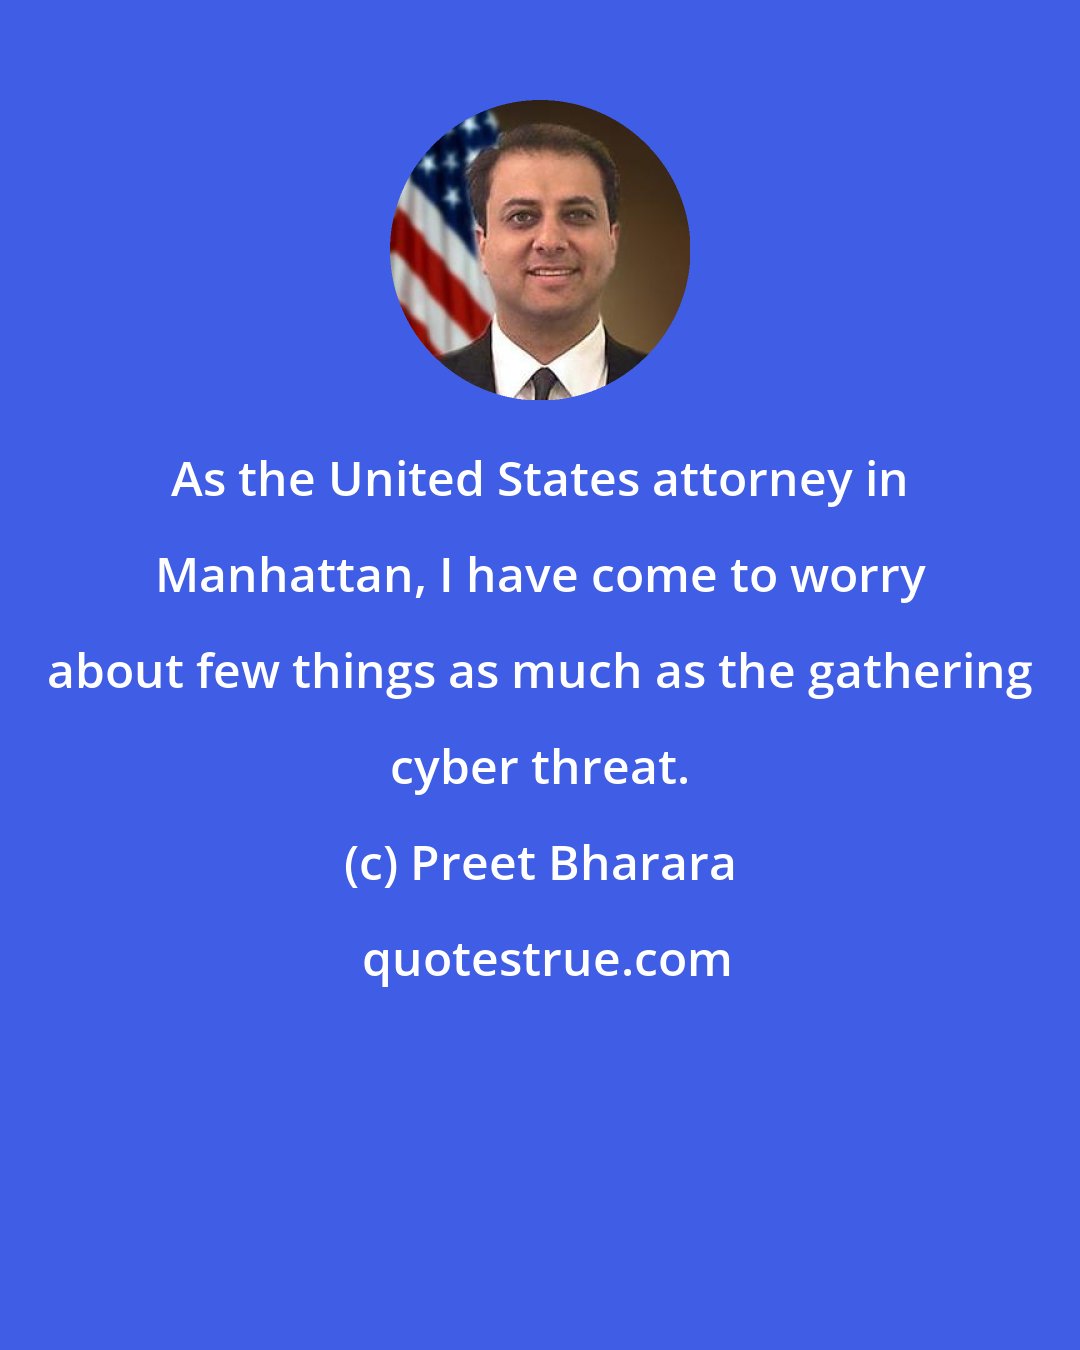 Preet Bharara: As the United States attorney in Manhattan, I have come to worry about few things as much as the gathering cyber threat.